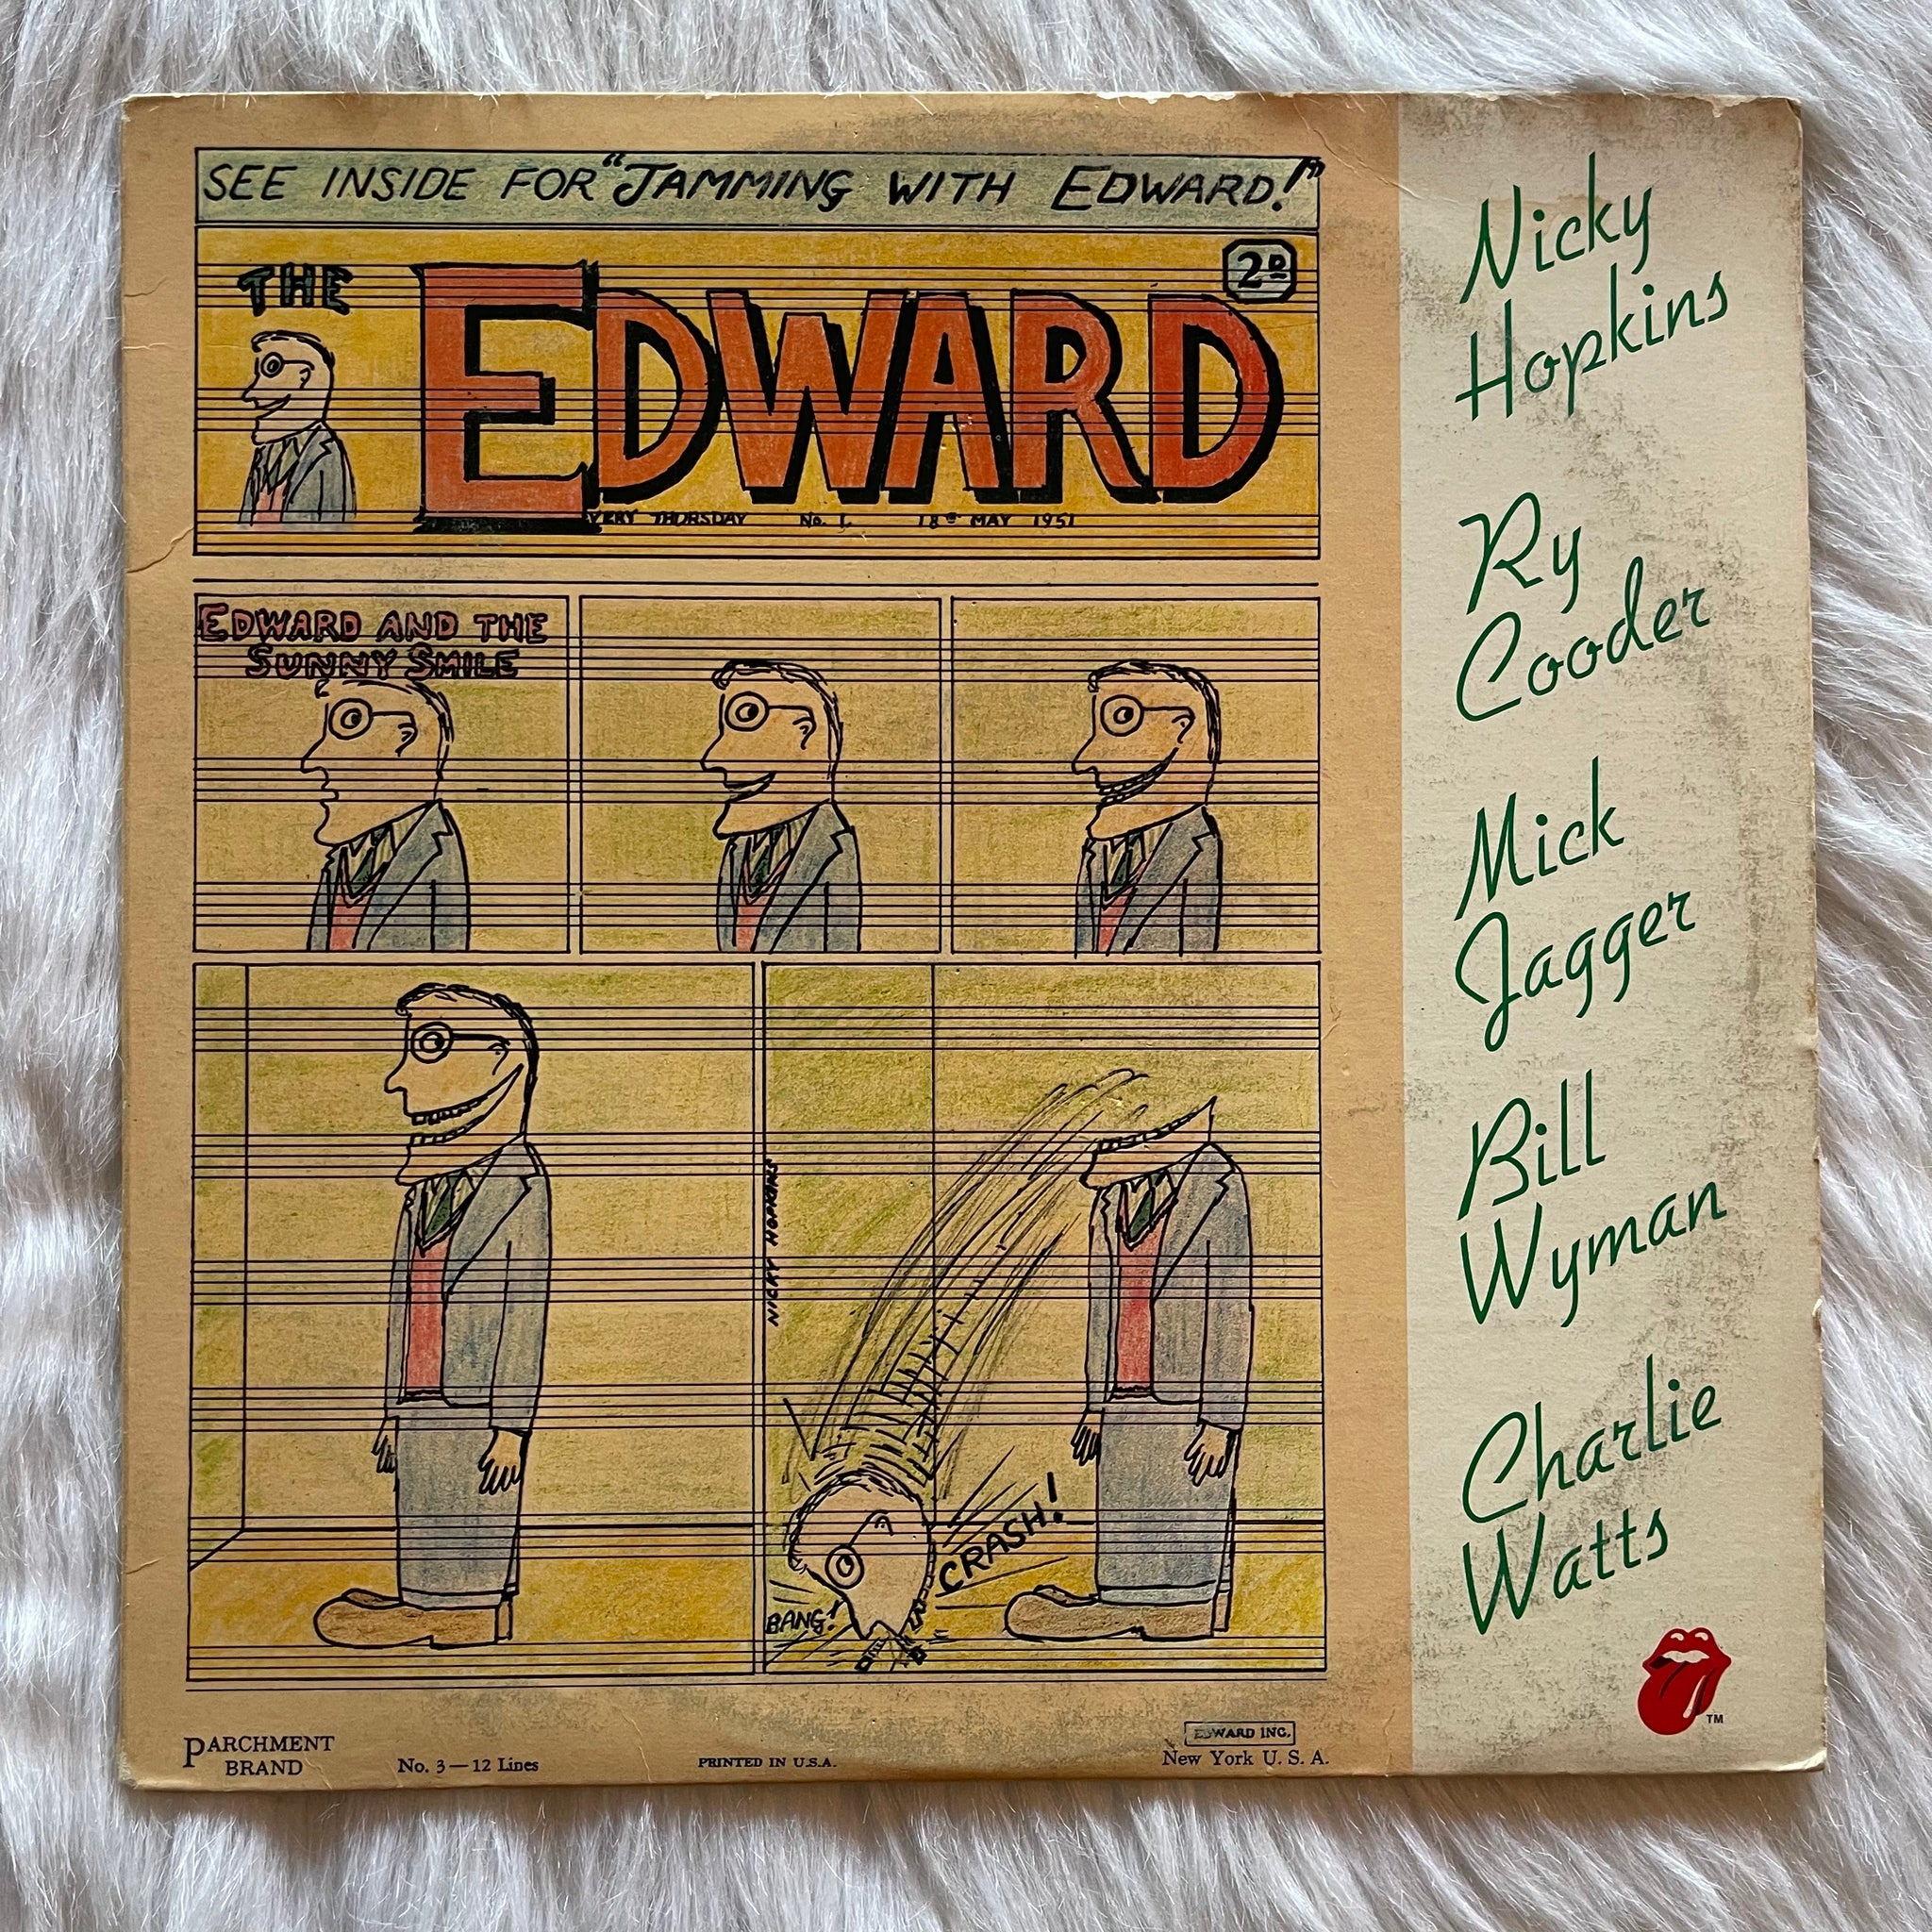 The Edward-Jamming with Edward